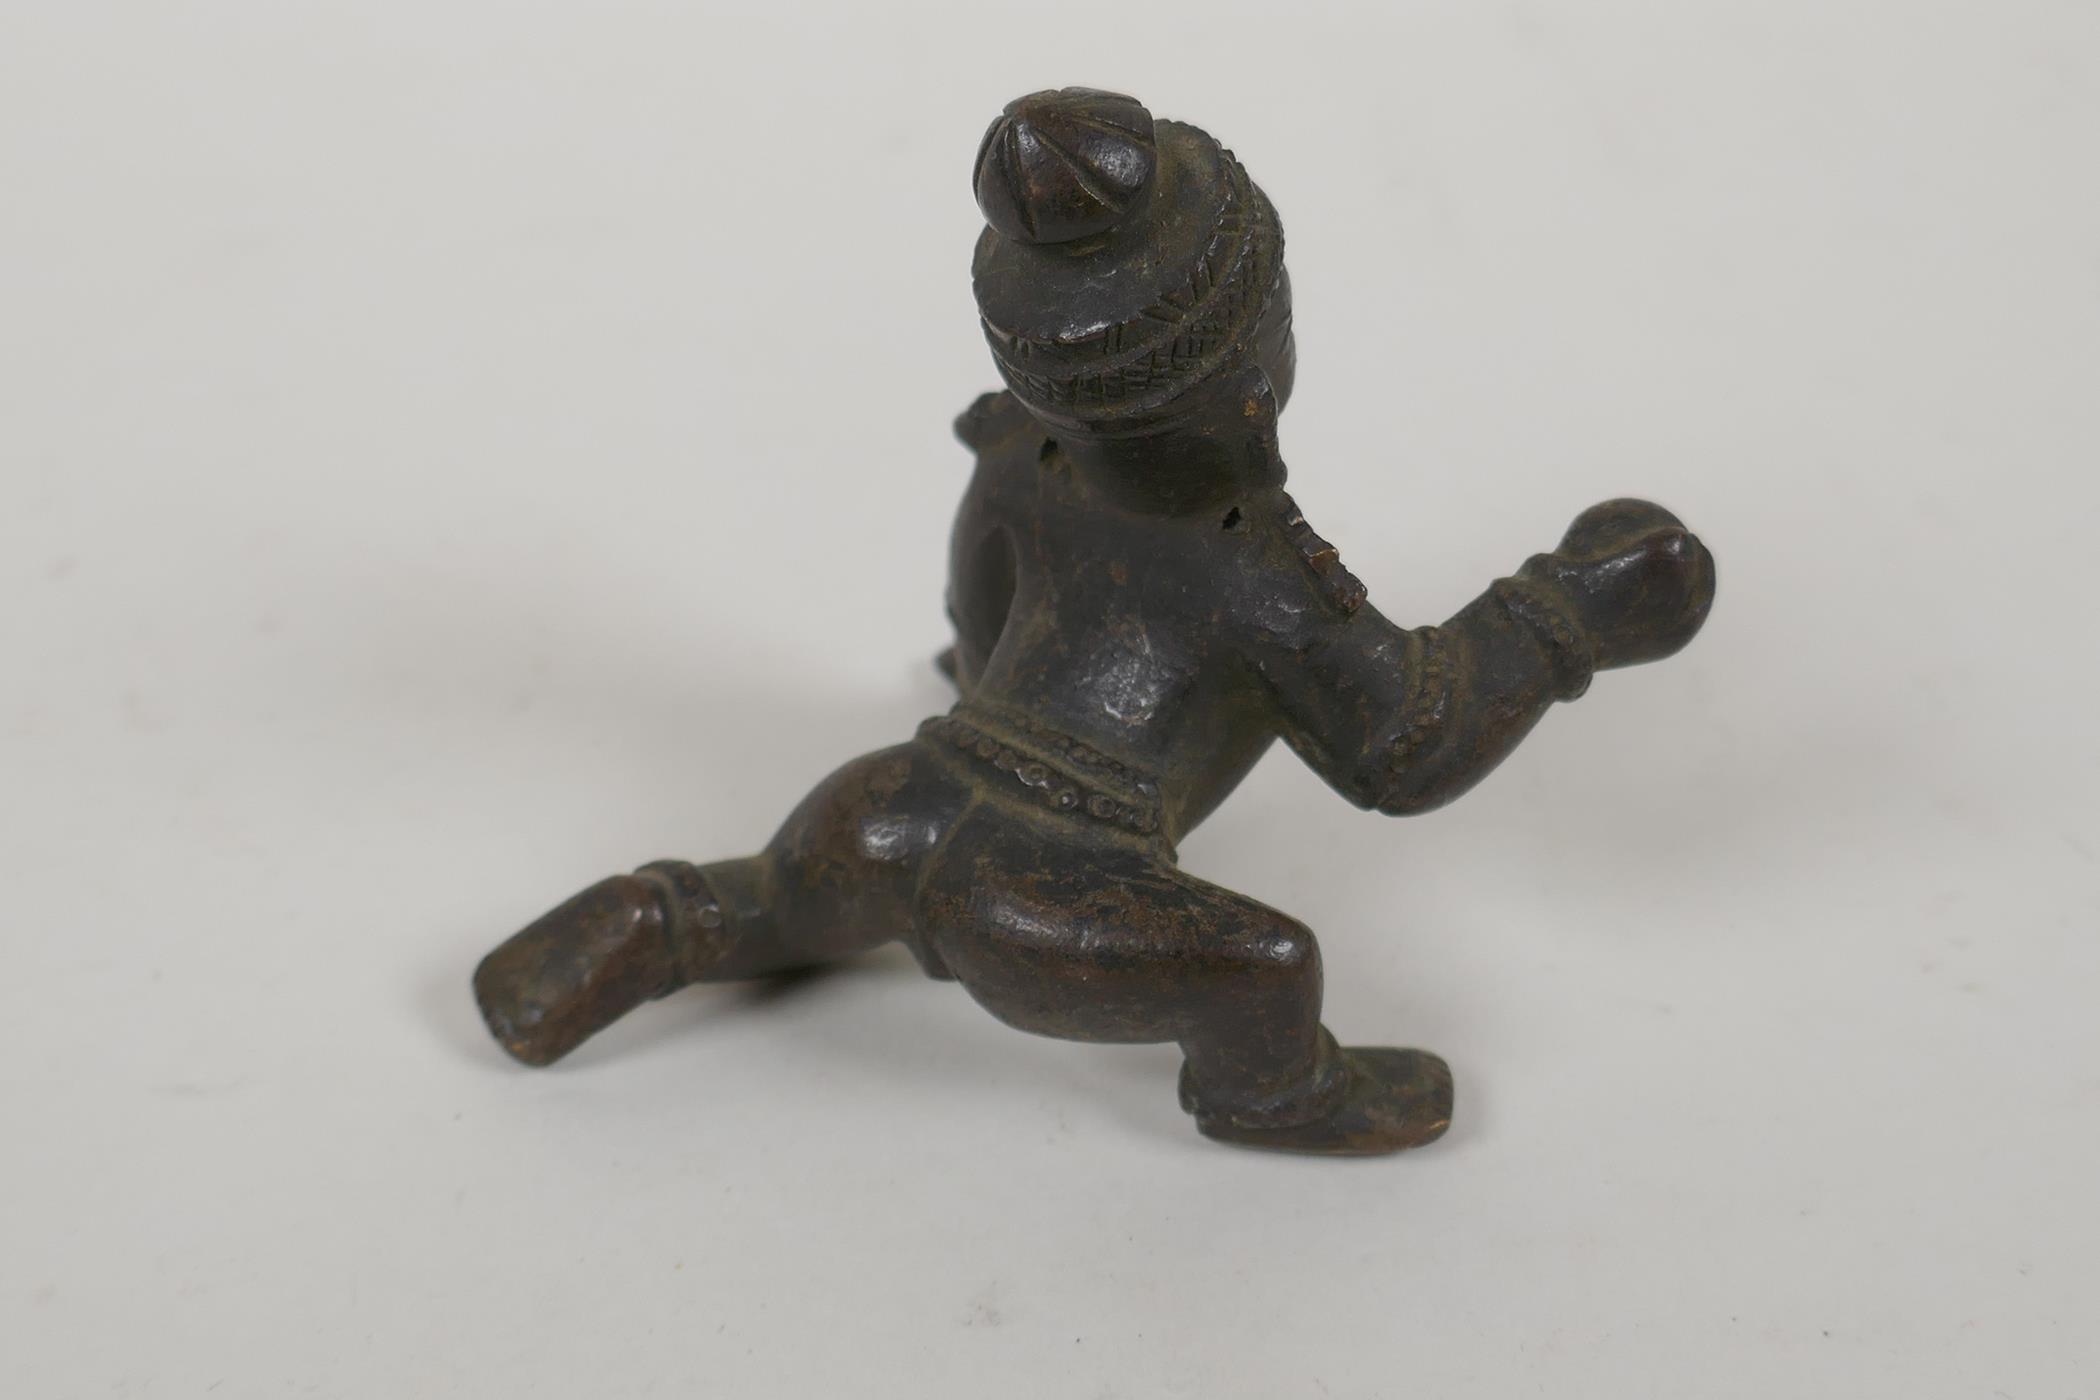 An antique Indian bronze of a crawling figure, 8cm long - Image 3 of 3